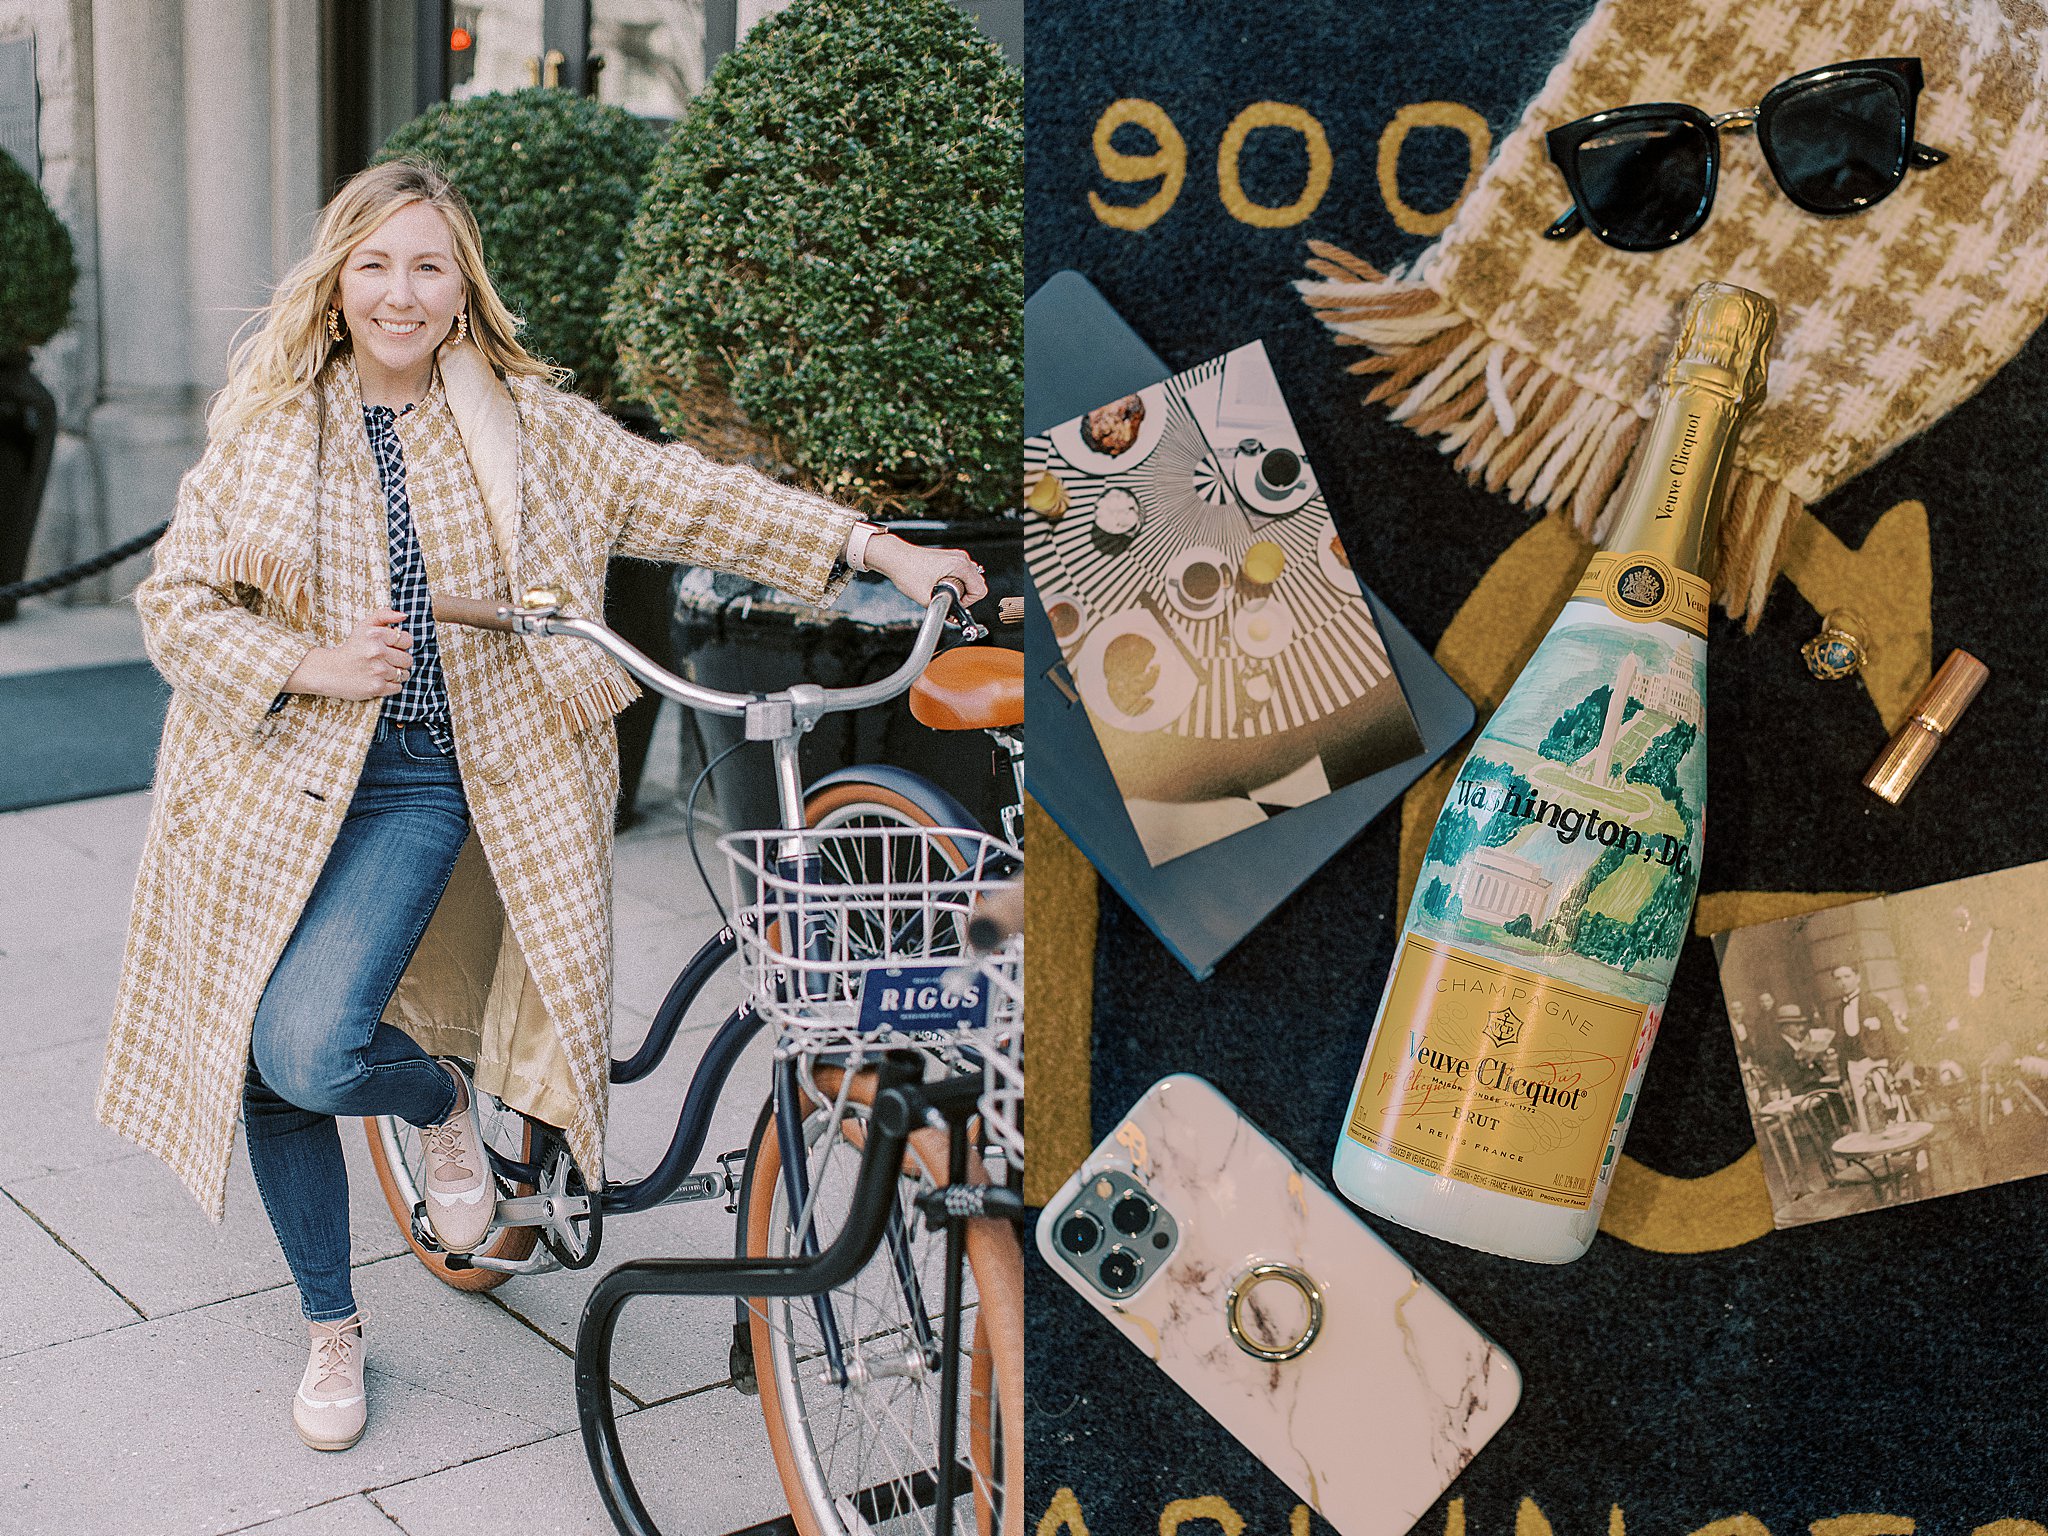 Anna Kay Photography Riggs Hotel city cruiser bikes with basket in DC and Veuve Clicquot custom champagne bottle